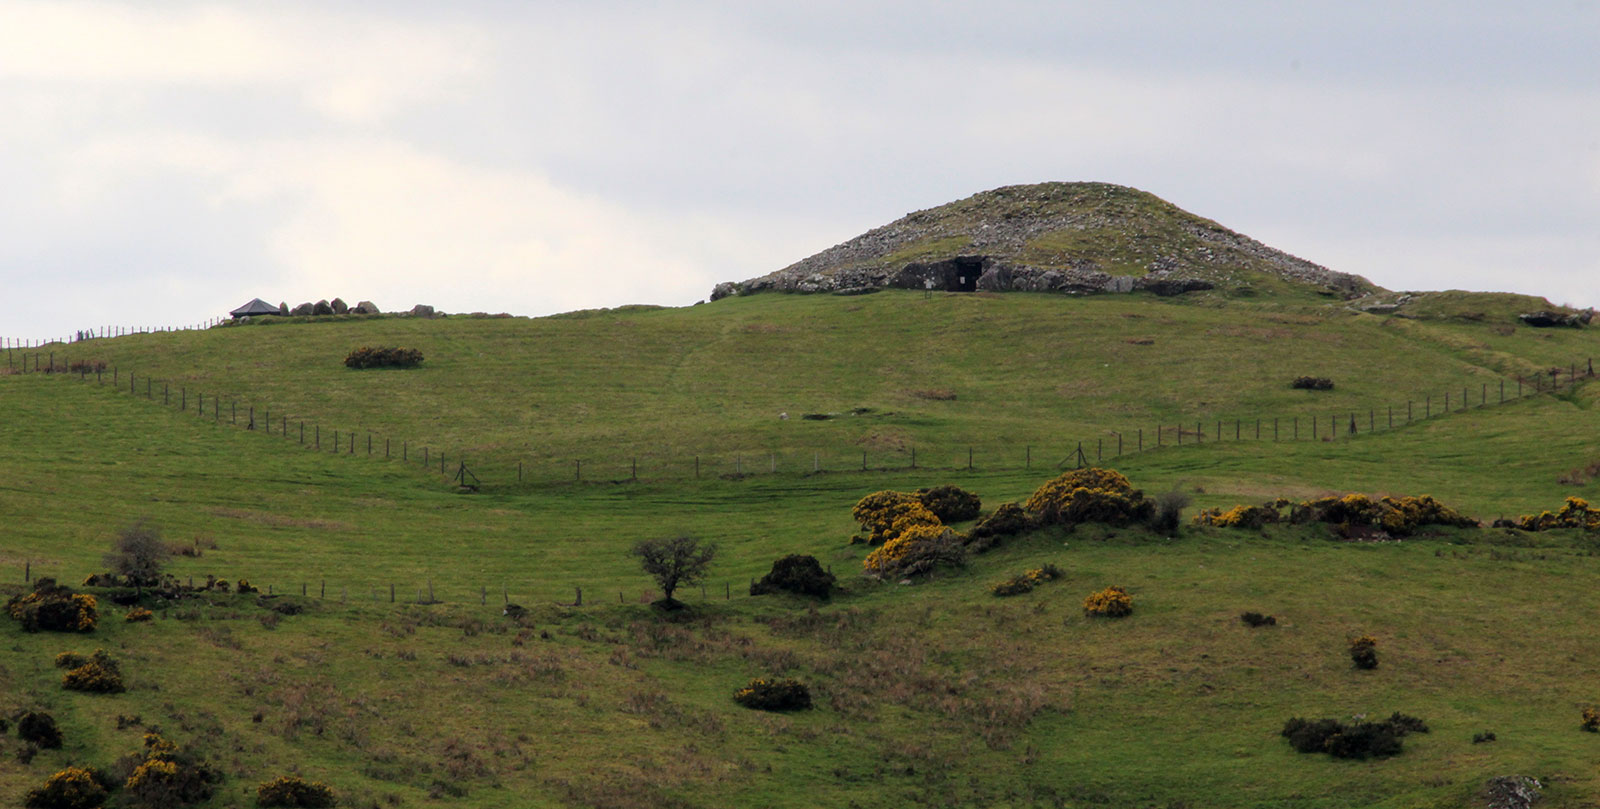 The Loughcrew landscape: Cairn T on the summit of Carnbane viewed from Patrickstown, the most easterly of the four hills of Sliabh na Cailleach.